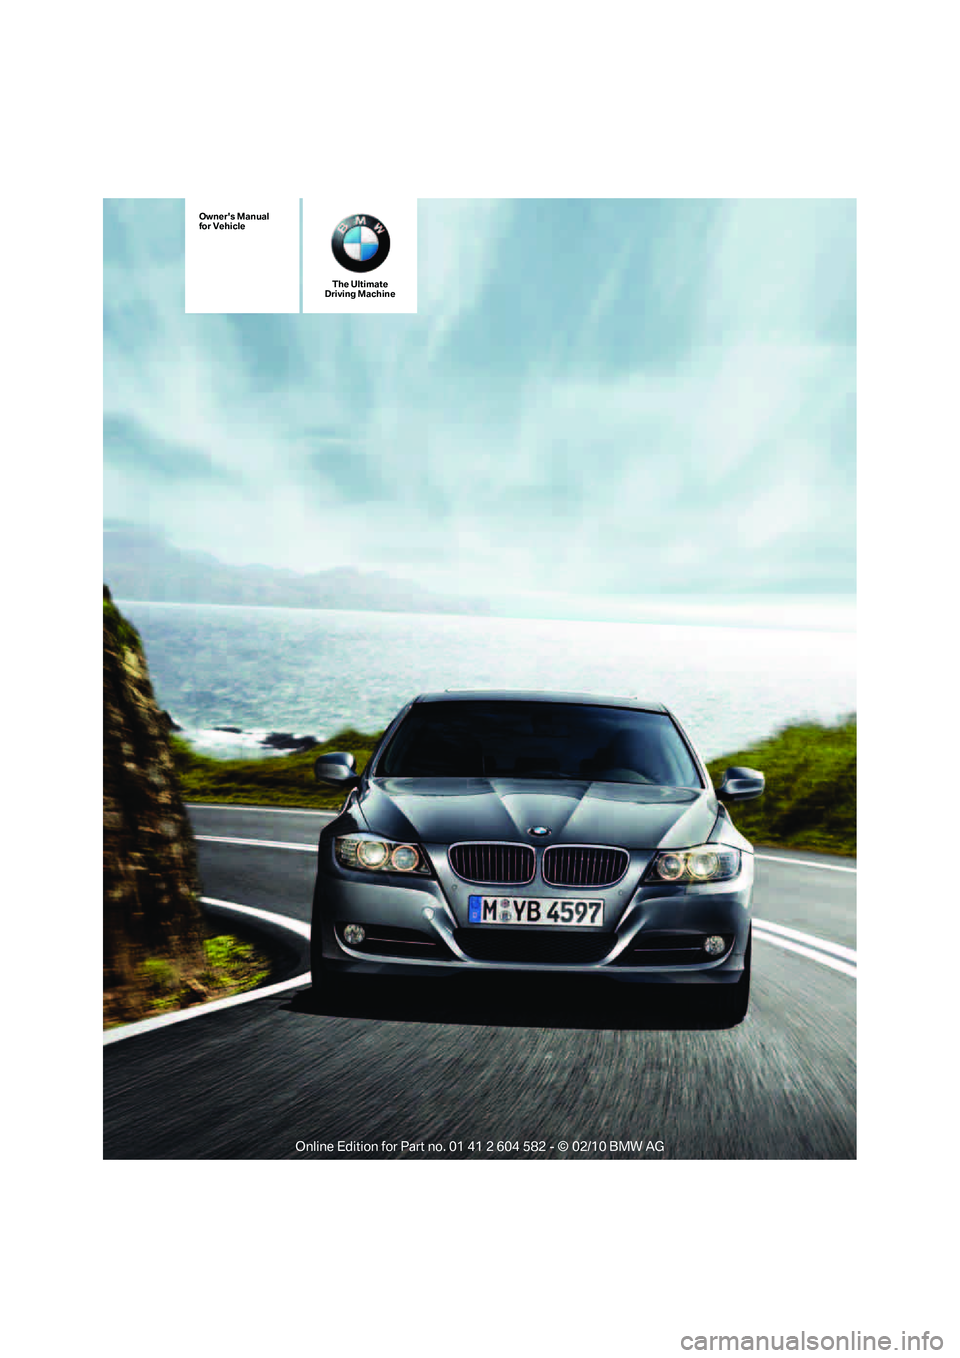 BMW 328I SPORTS WAGON 2011  Owners Manual The Ultimate
Driving Machine
Owners Manual
for Vehicle 